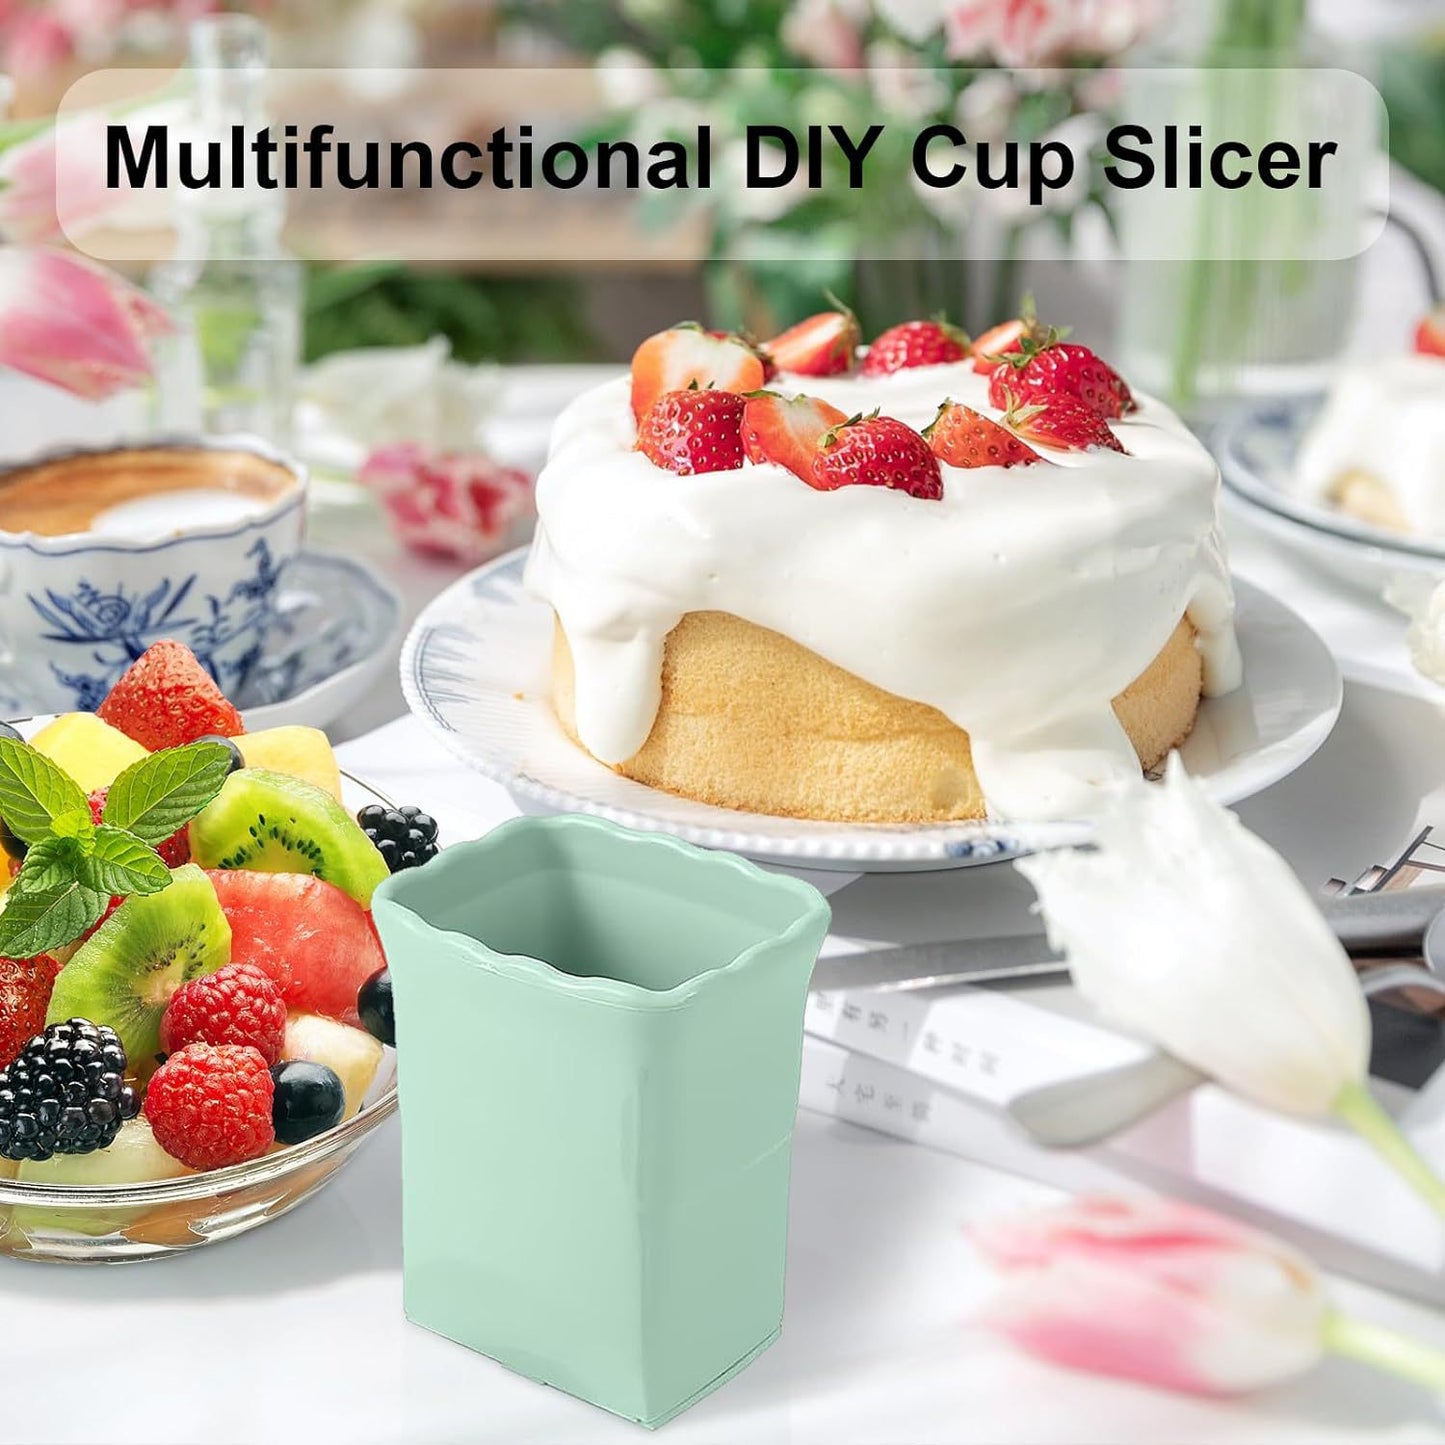 Strawberry Cutter and Slicer Set - Easy-to-Use Fruit Chopper with Precision Blades - Perfect for Creating Beautiful Fruit Platter and Dessert Garnishes - BPA-Free and Top-Rack Dishwasher Safe - Great Kitchen Accessory for Entertaining and Daily Prep